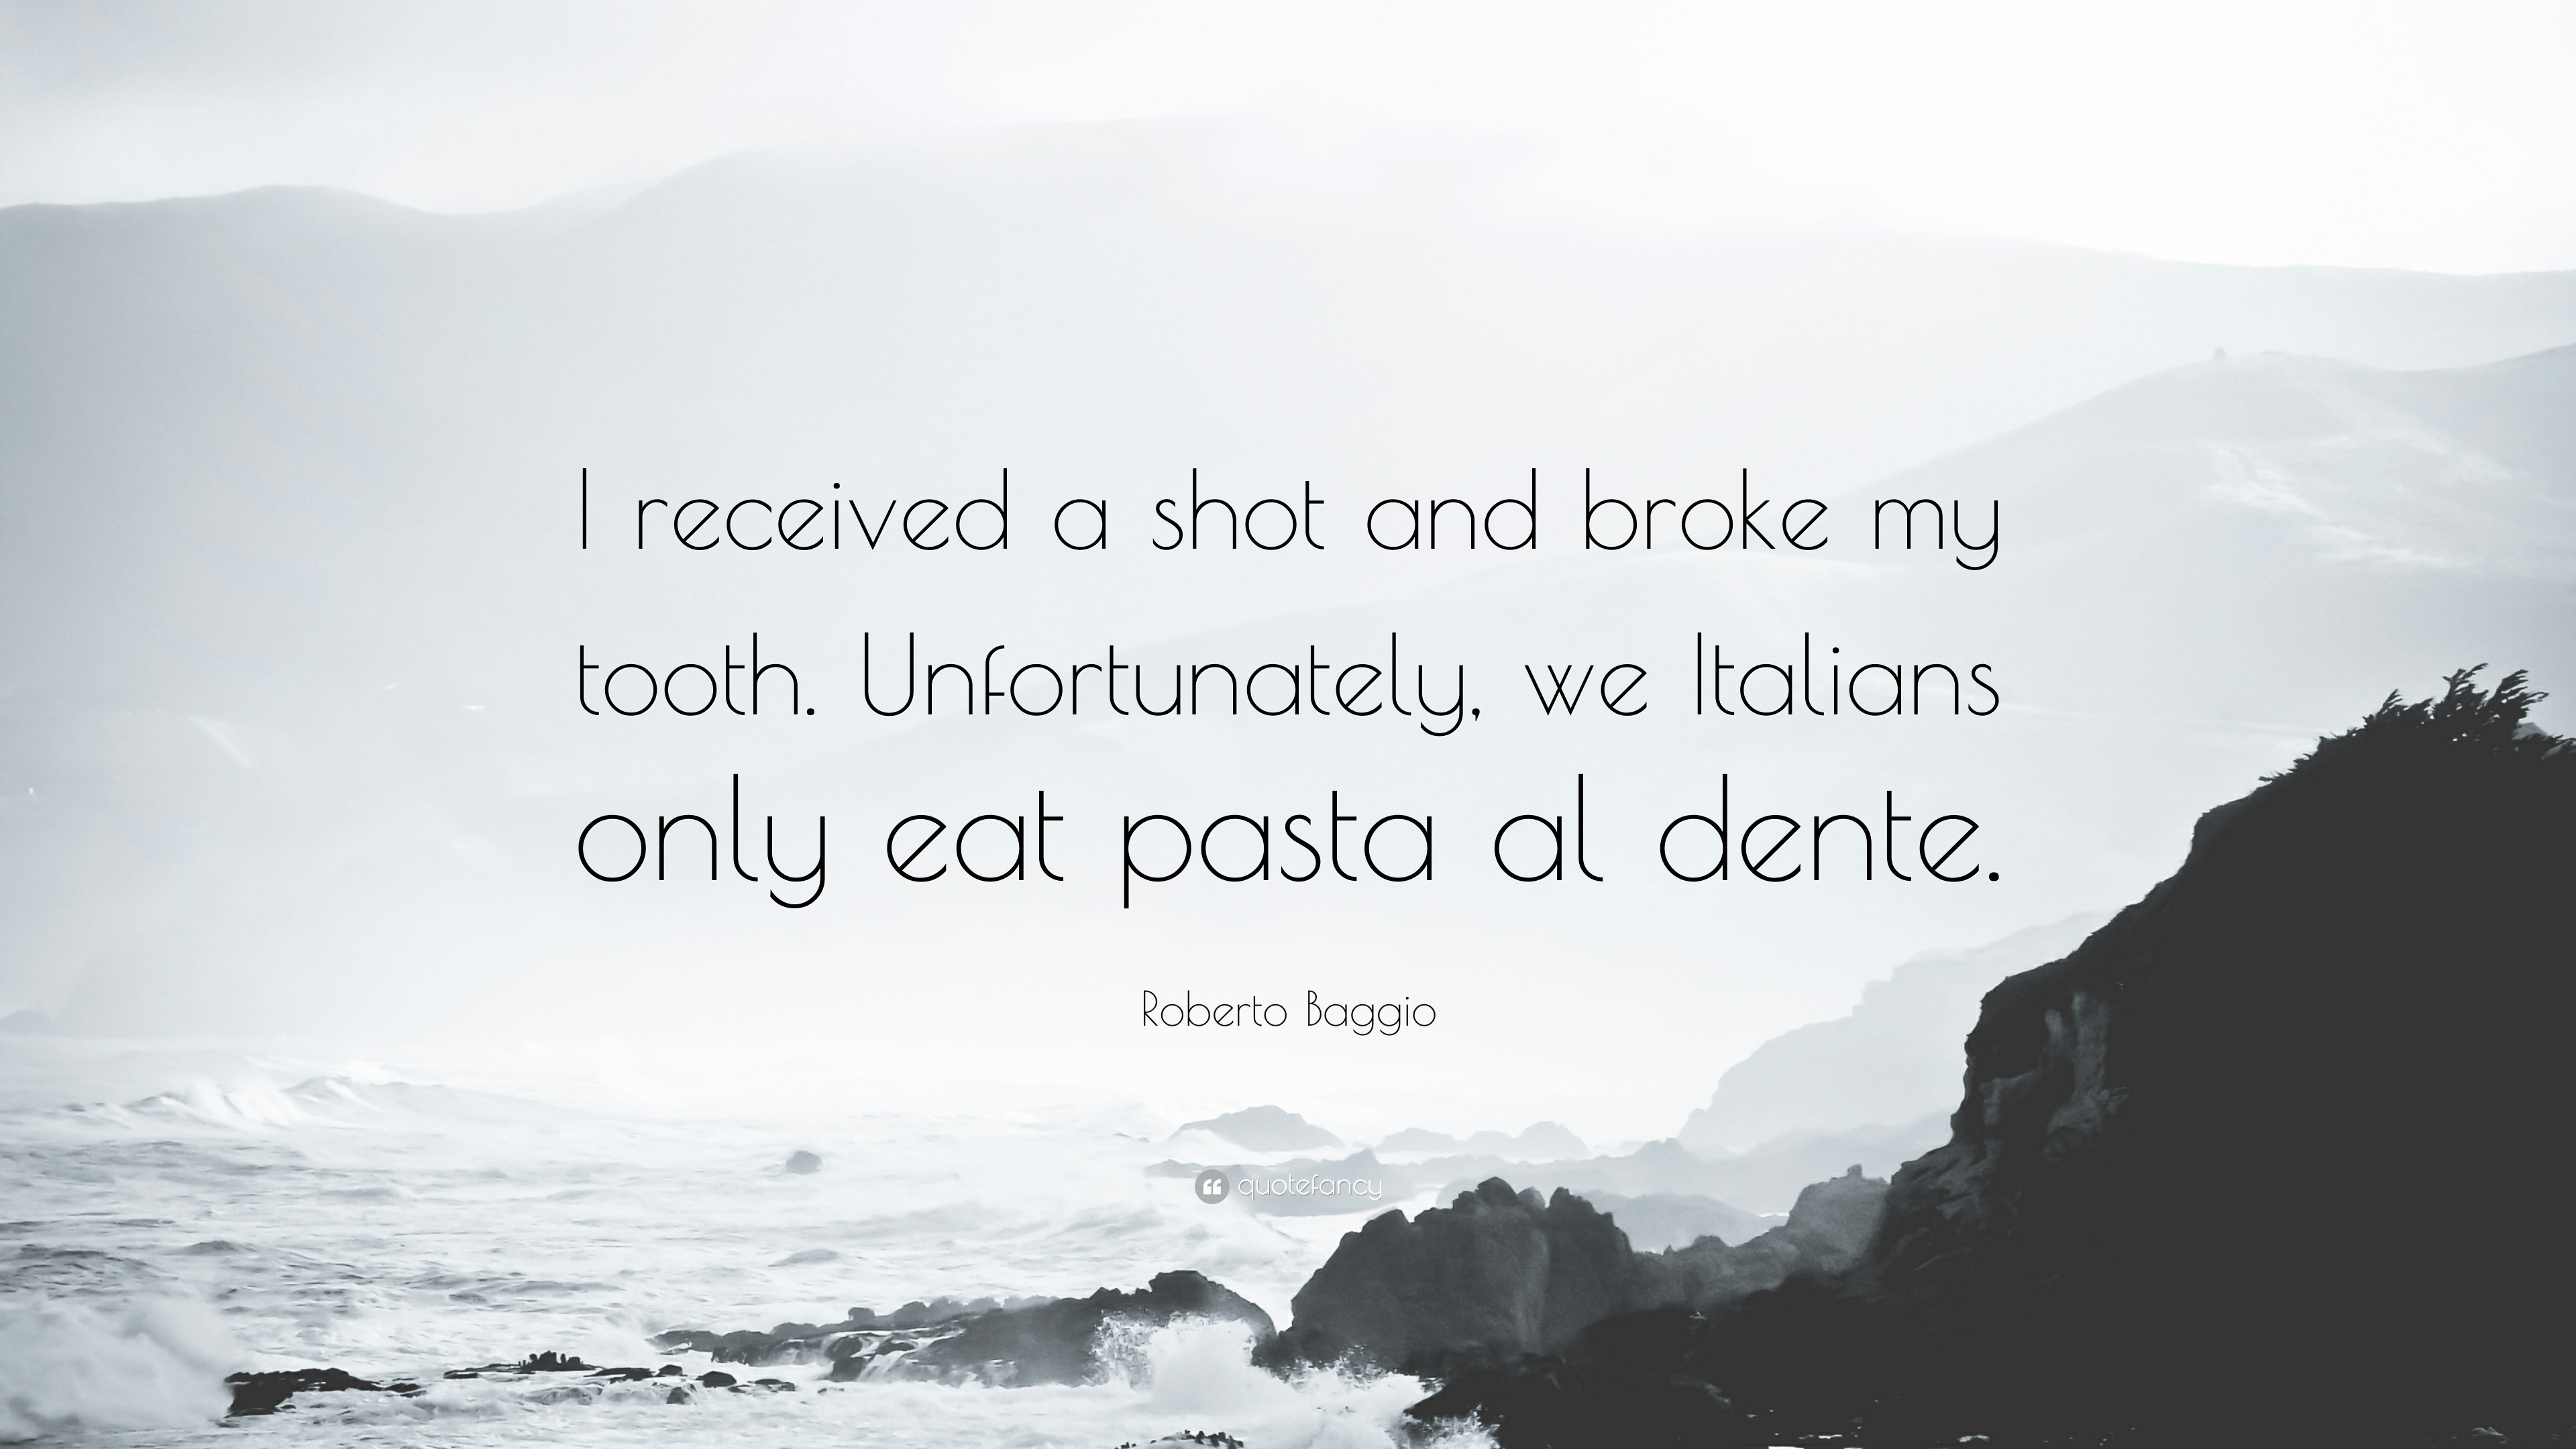 Roberto Baggio Quote: “I received a shot and broke my tooth. Unfortunately,  we Italians only eat